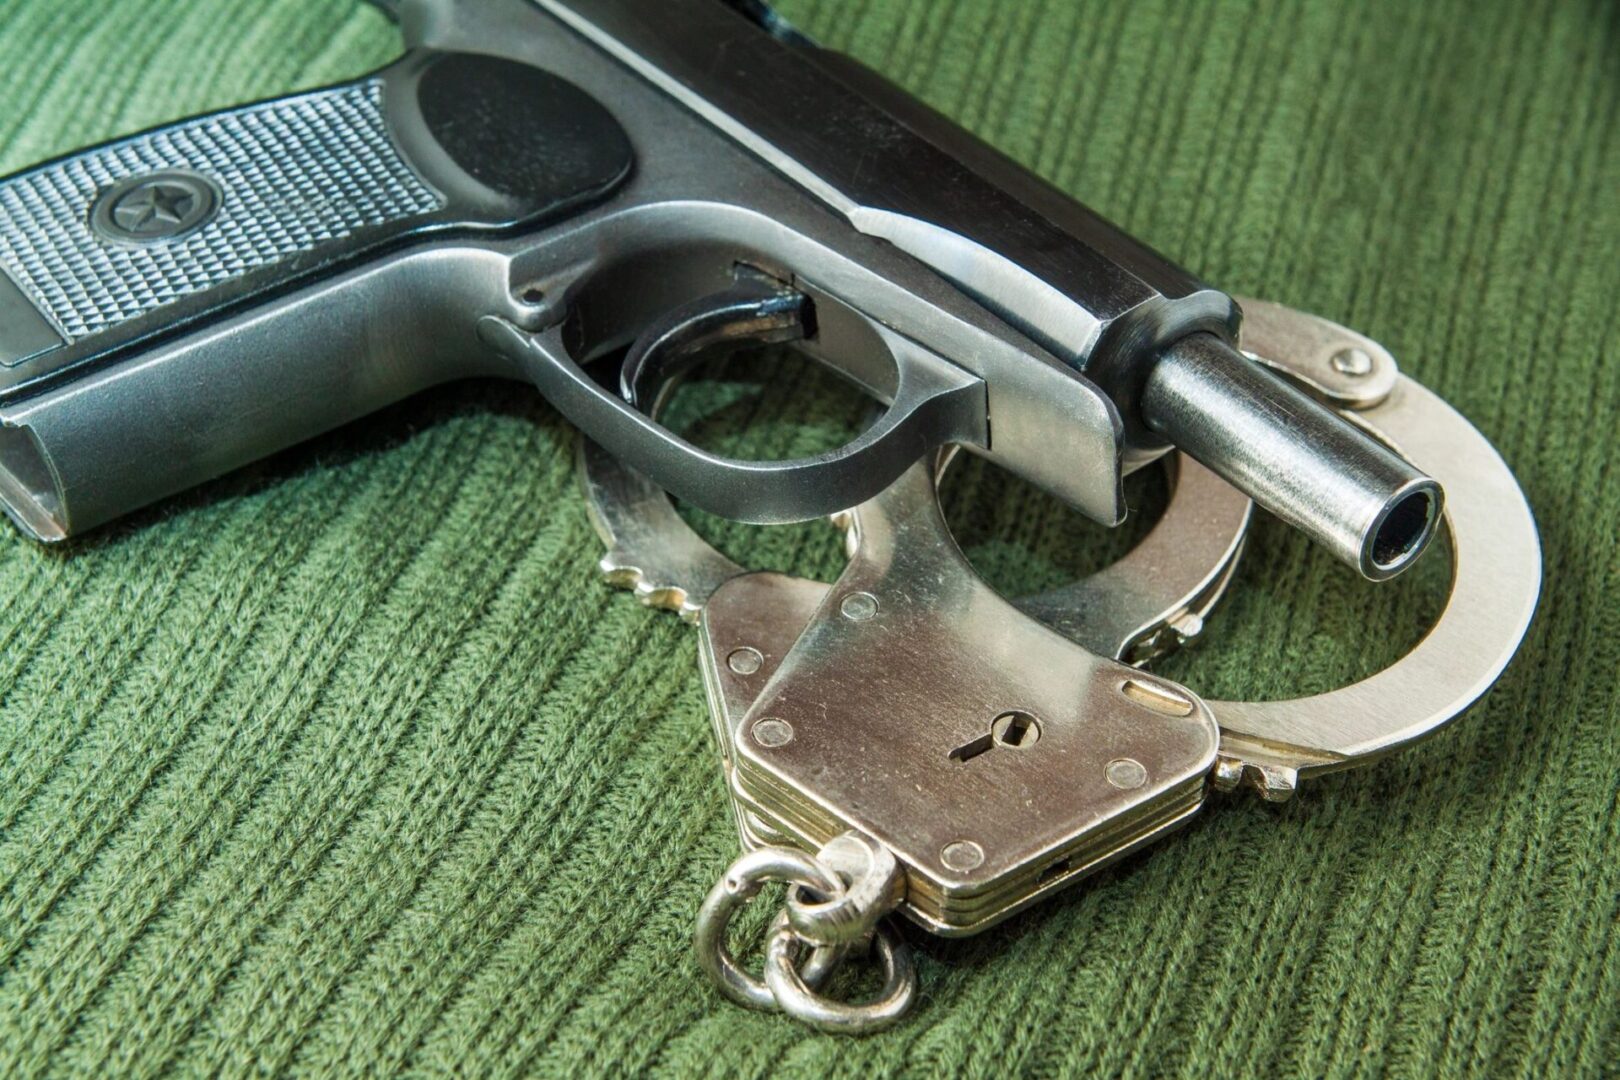 A gun and handcuffs on top of a green cloth.